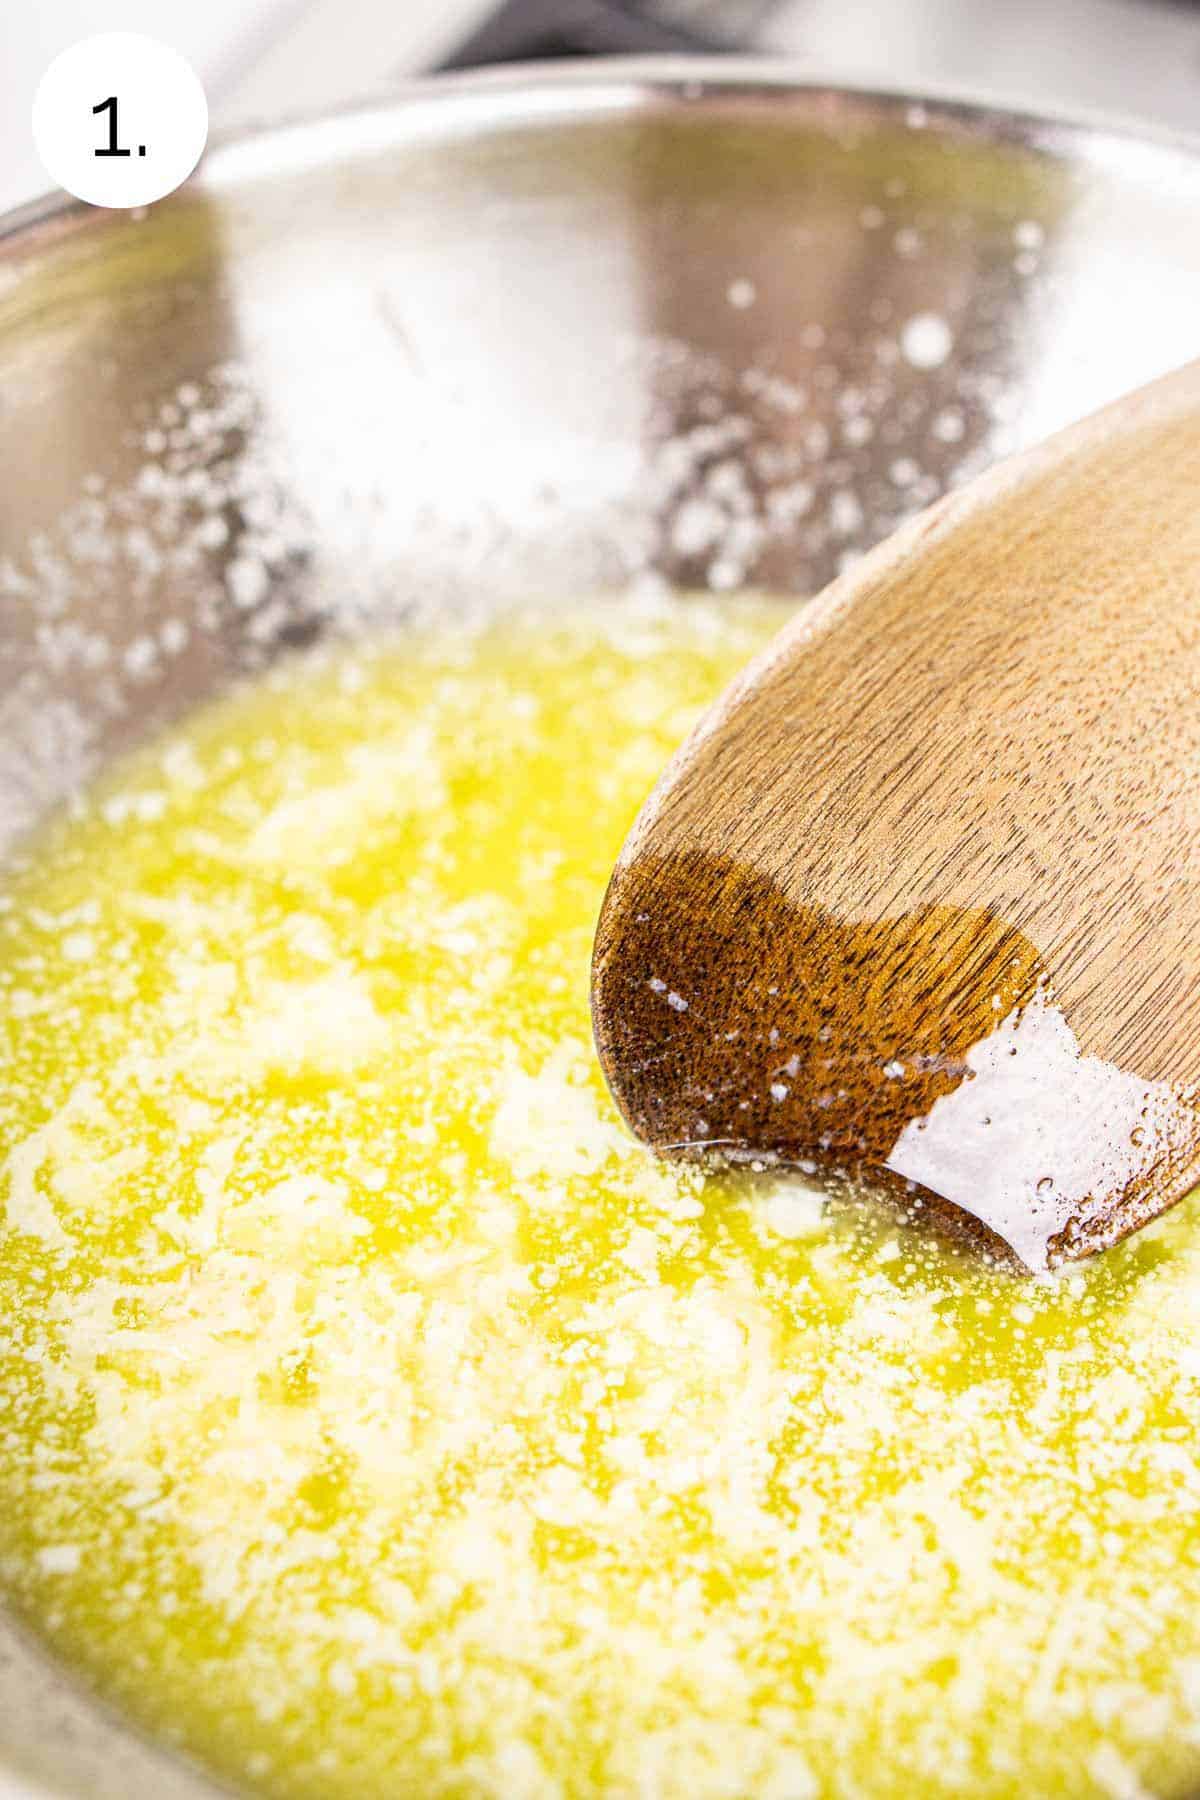 A wooden spoon stirring together the melted butter and garlic in a small stainless saucepan on the stove.